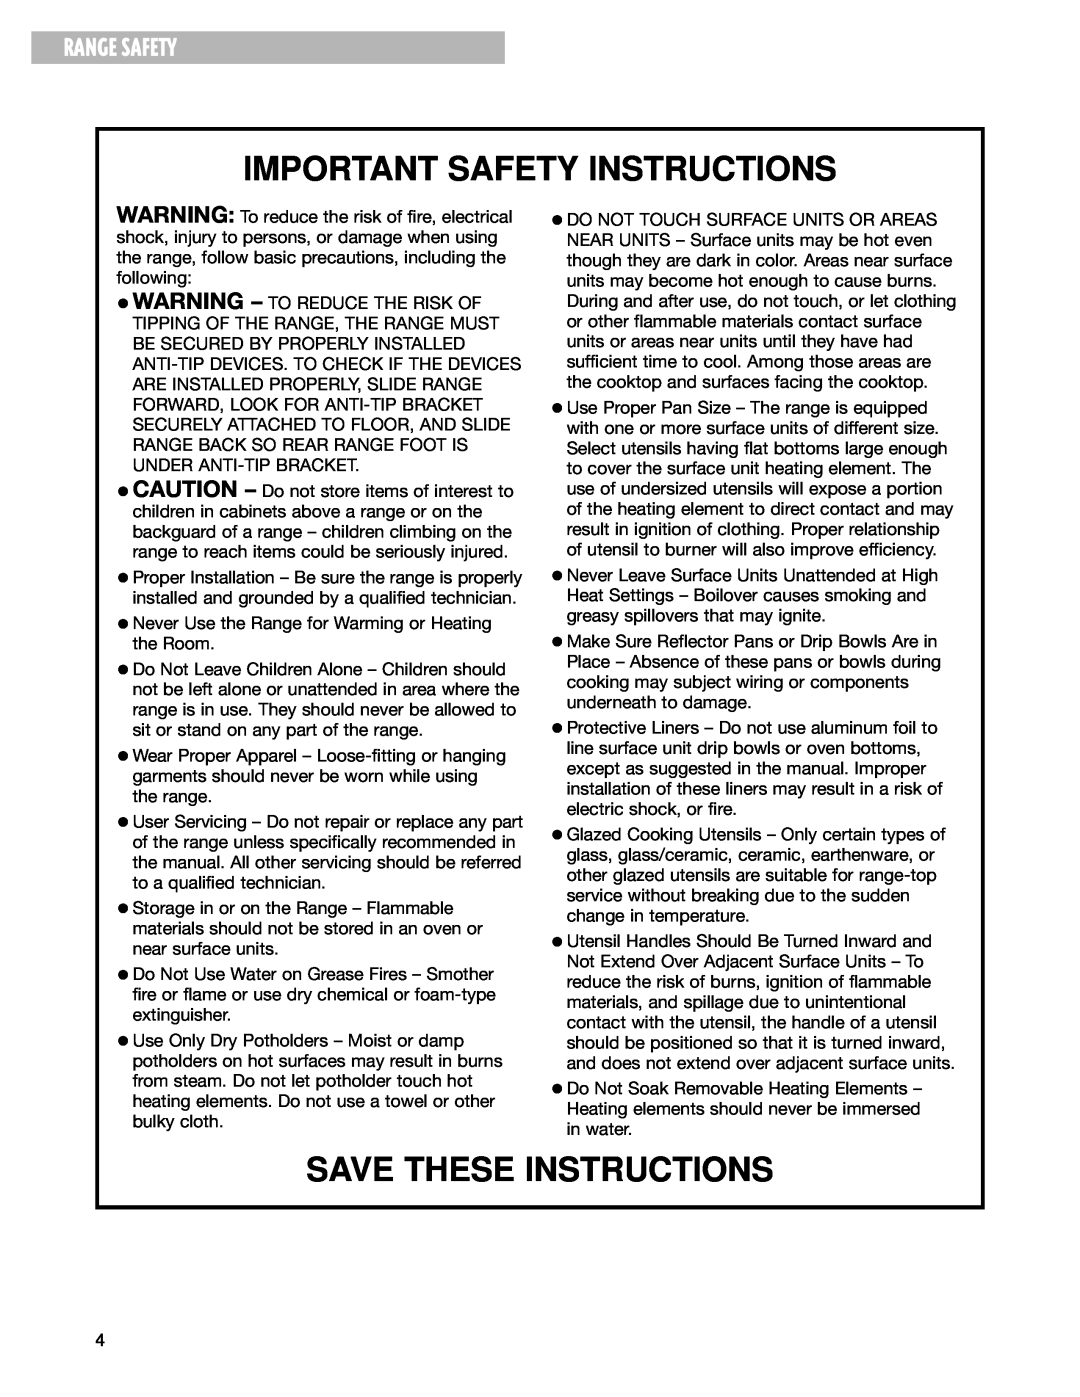 Whirlpool RF344BXH warranty Important Safety Instructions, Save These Instructions, Range Safety 